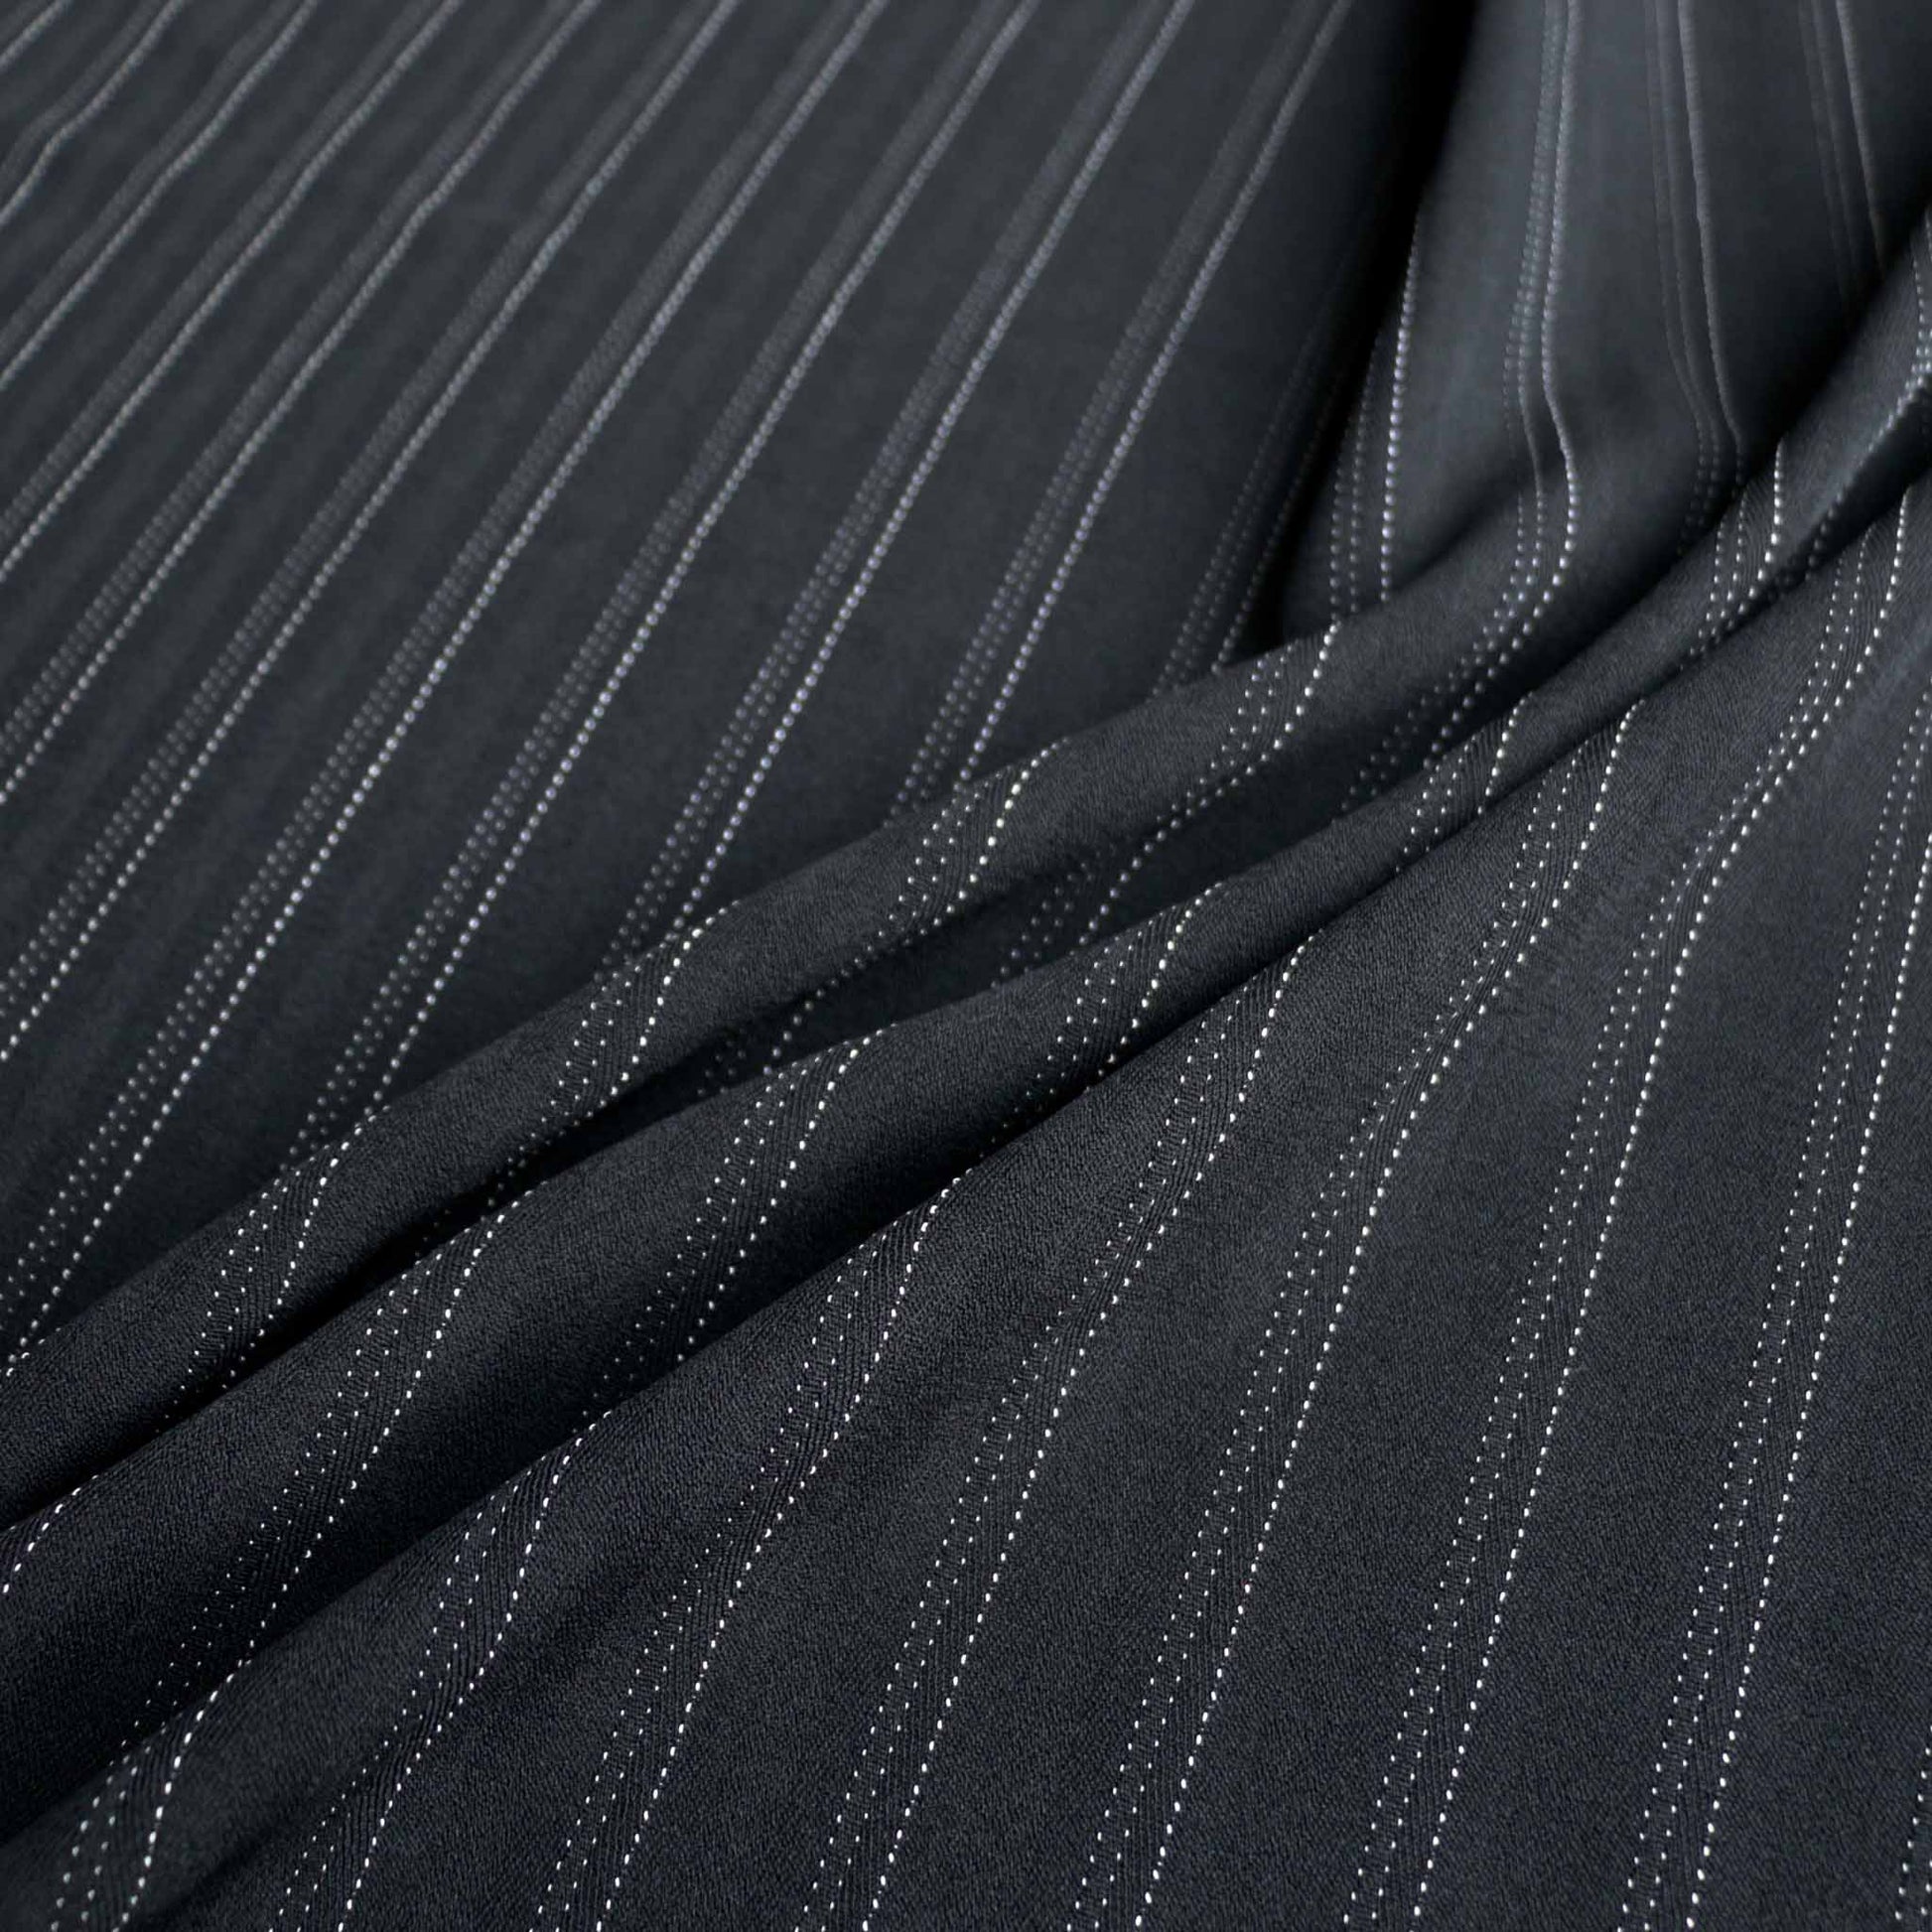 stretchy black suiting synthetic fabric with dotted white pinstripe